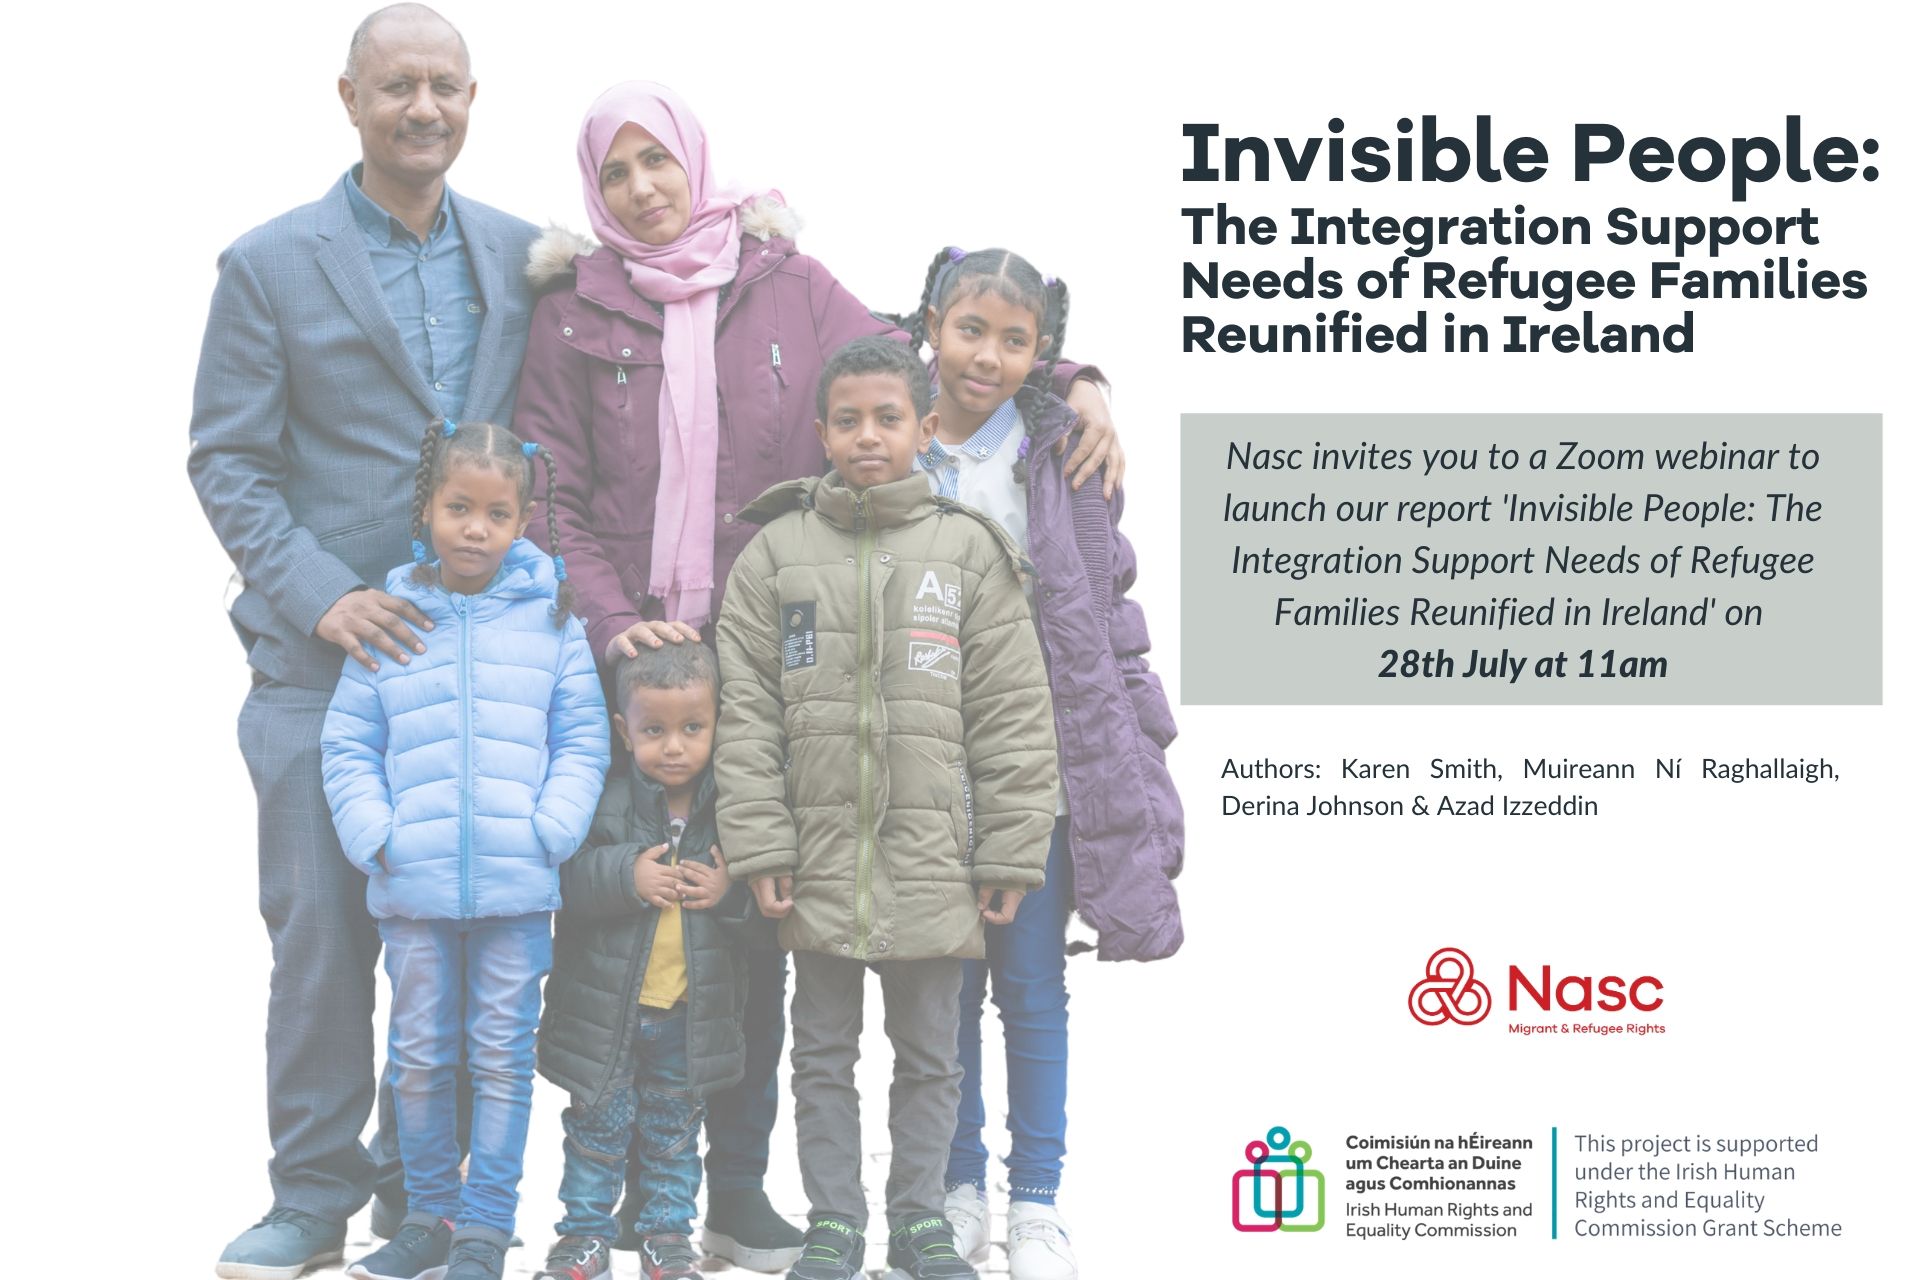 Invitation to attend Invisible People launch - depicts family standing together